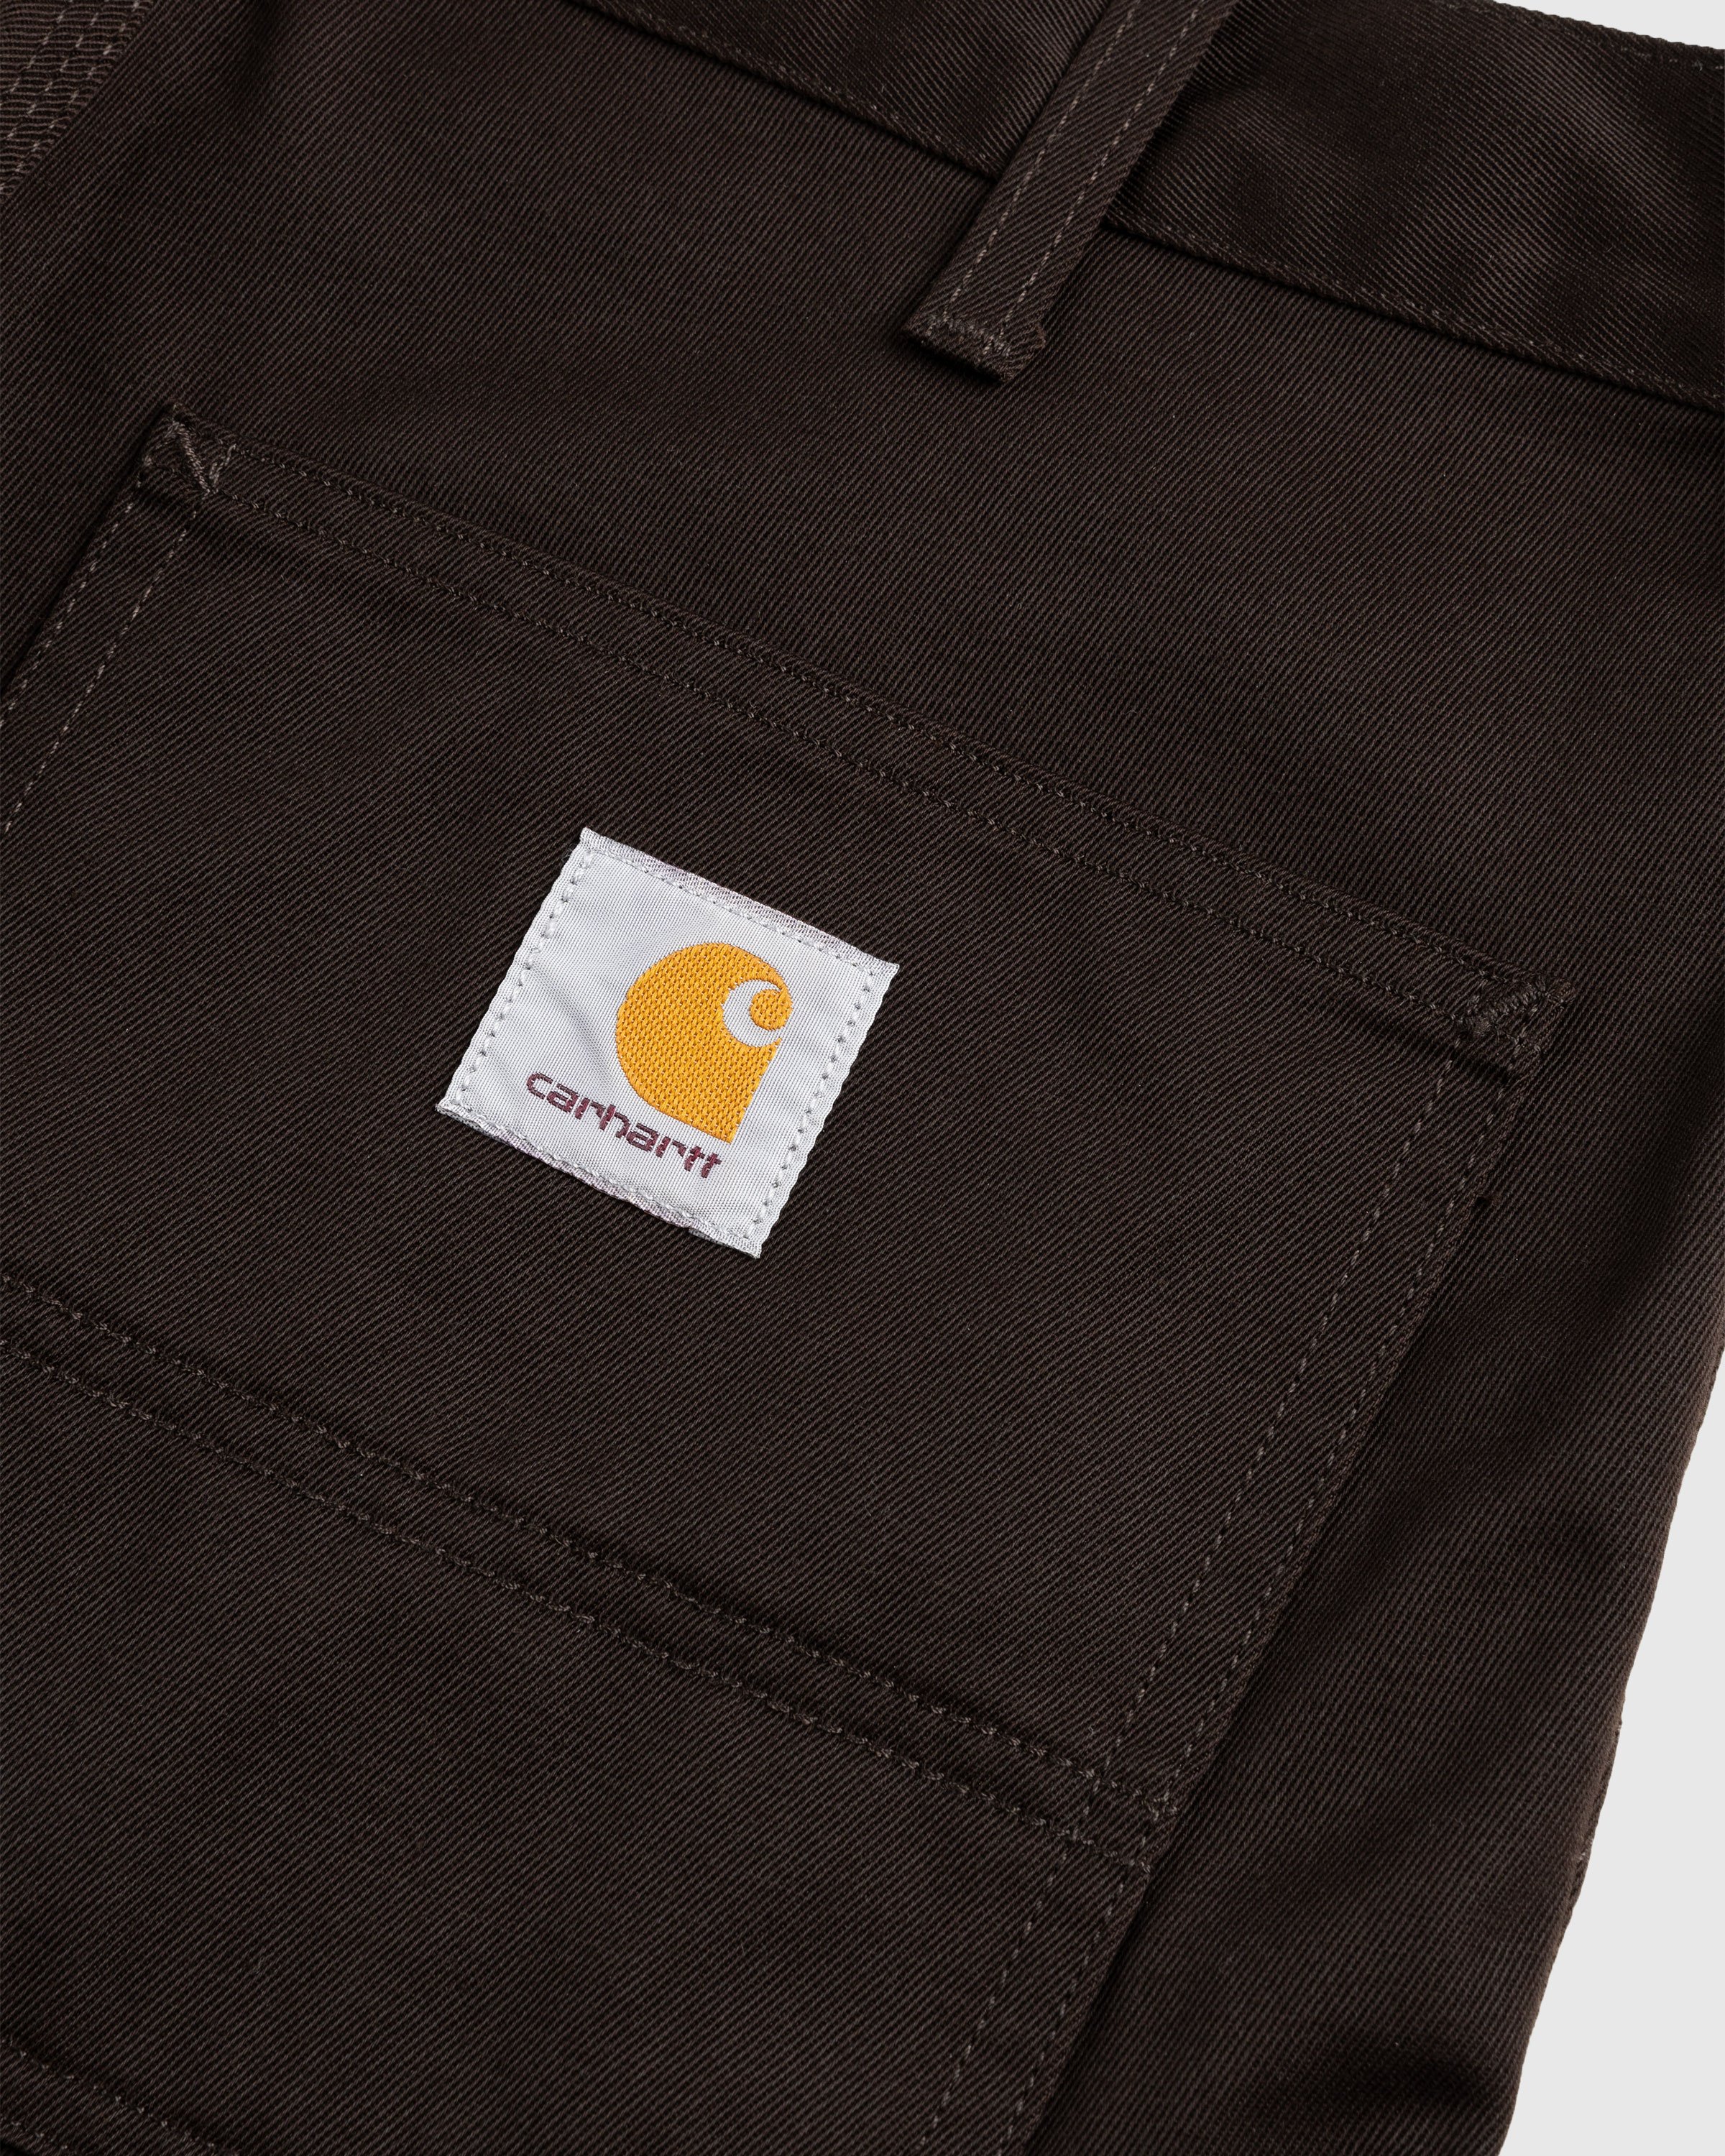 Carhartt WIP – Double Knee Pant Tobacco/Rinsed | Highsnobiety Shop